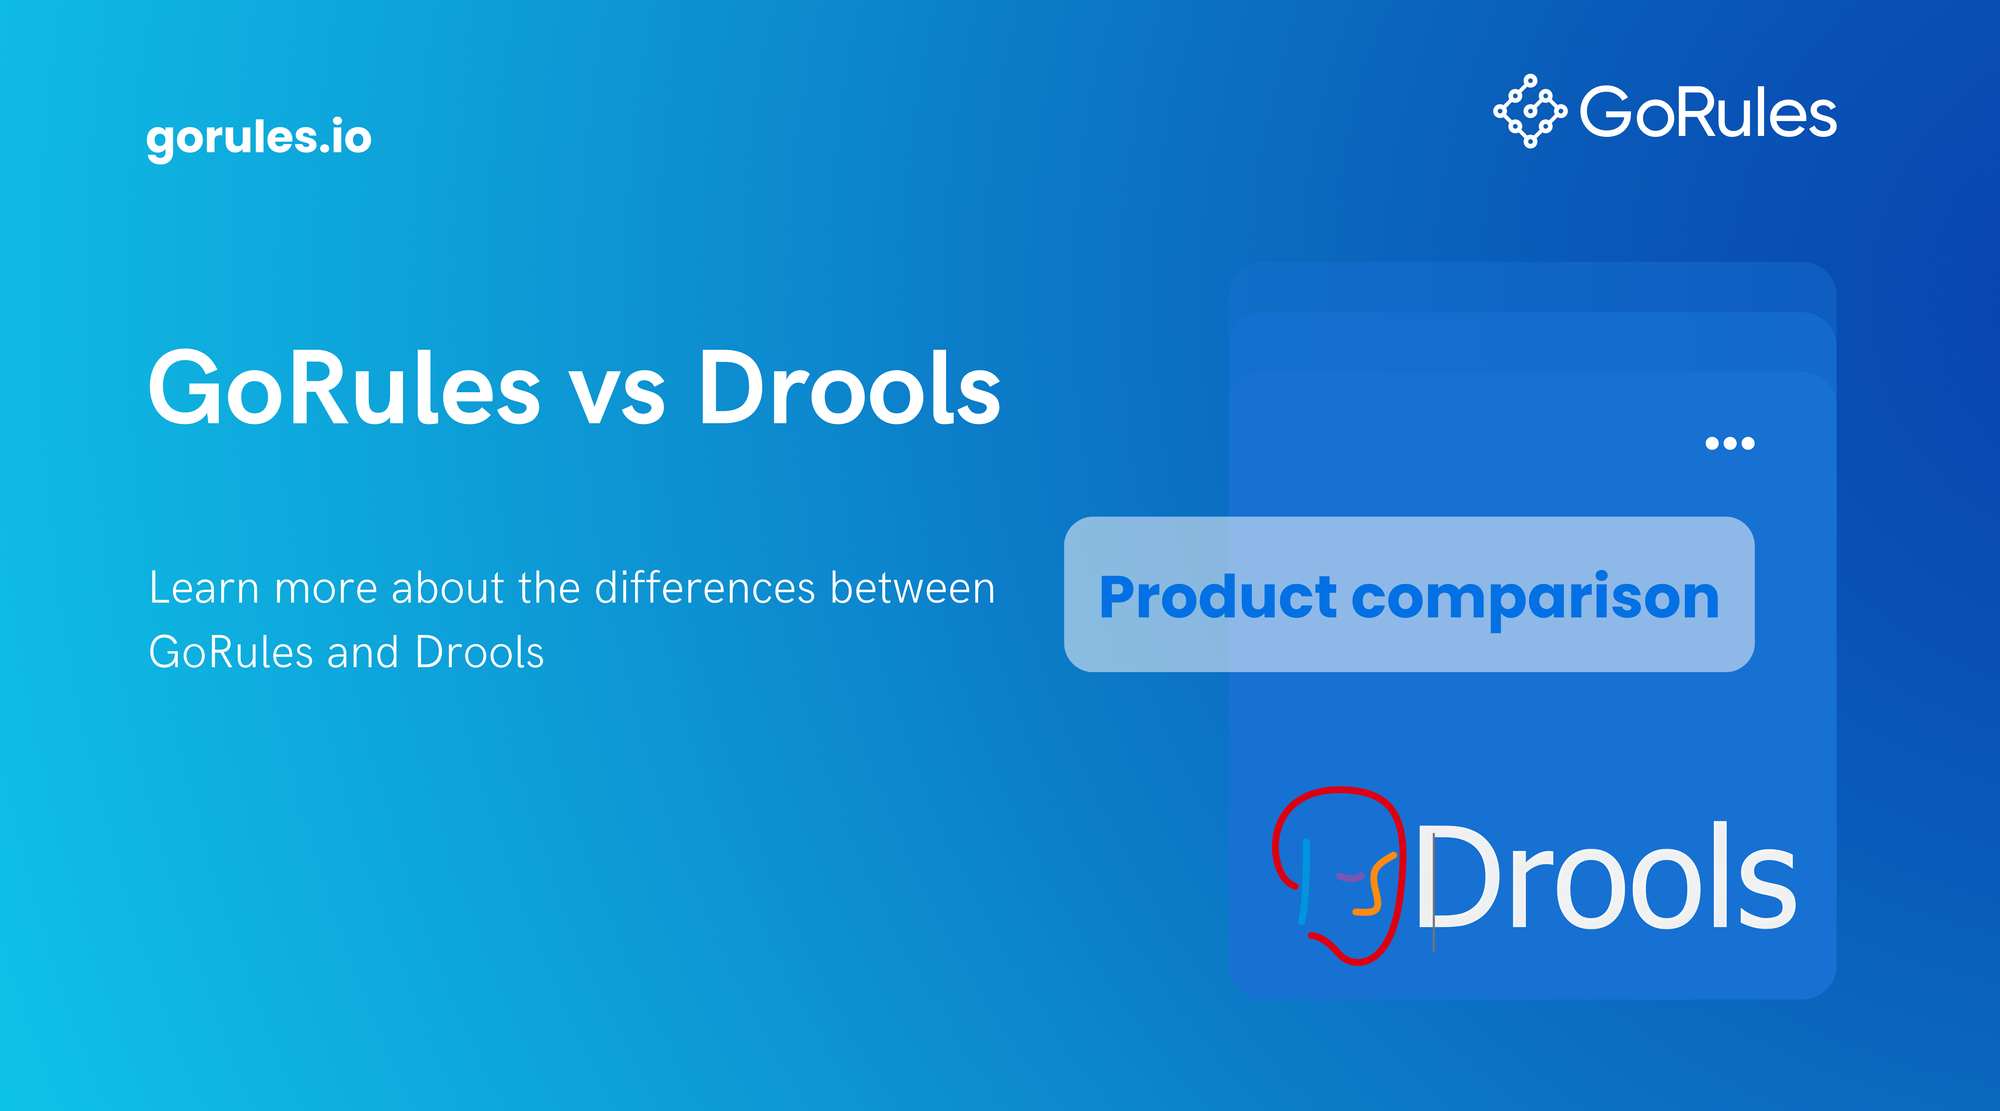 Learn more about the differences between GoRules and Drools